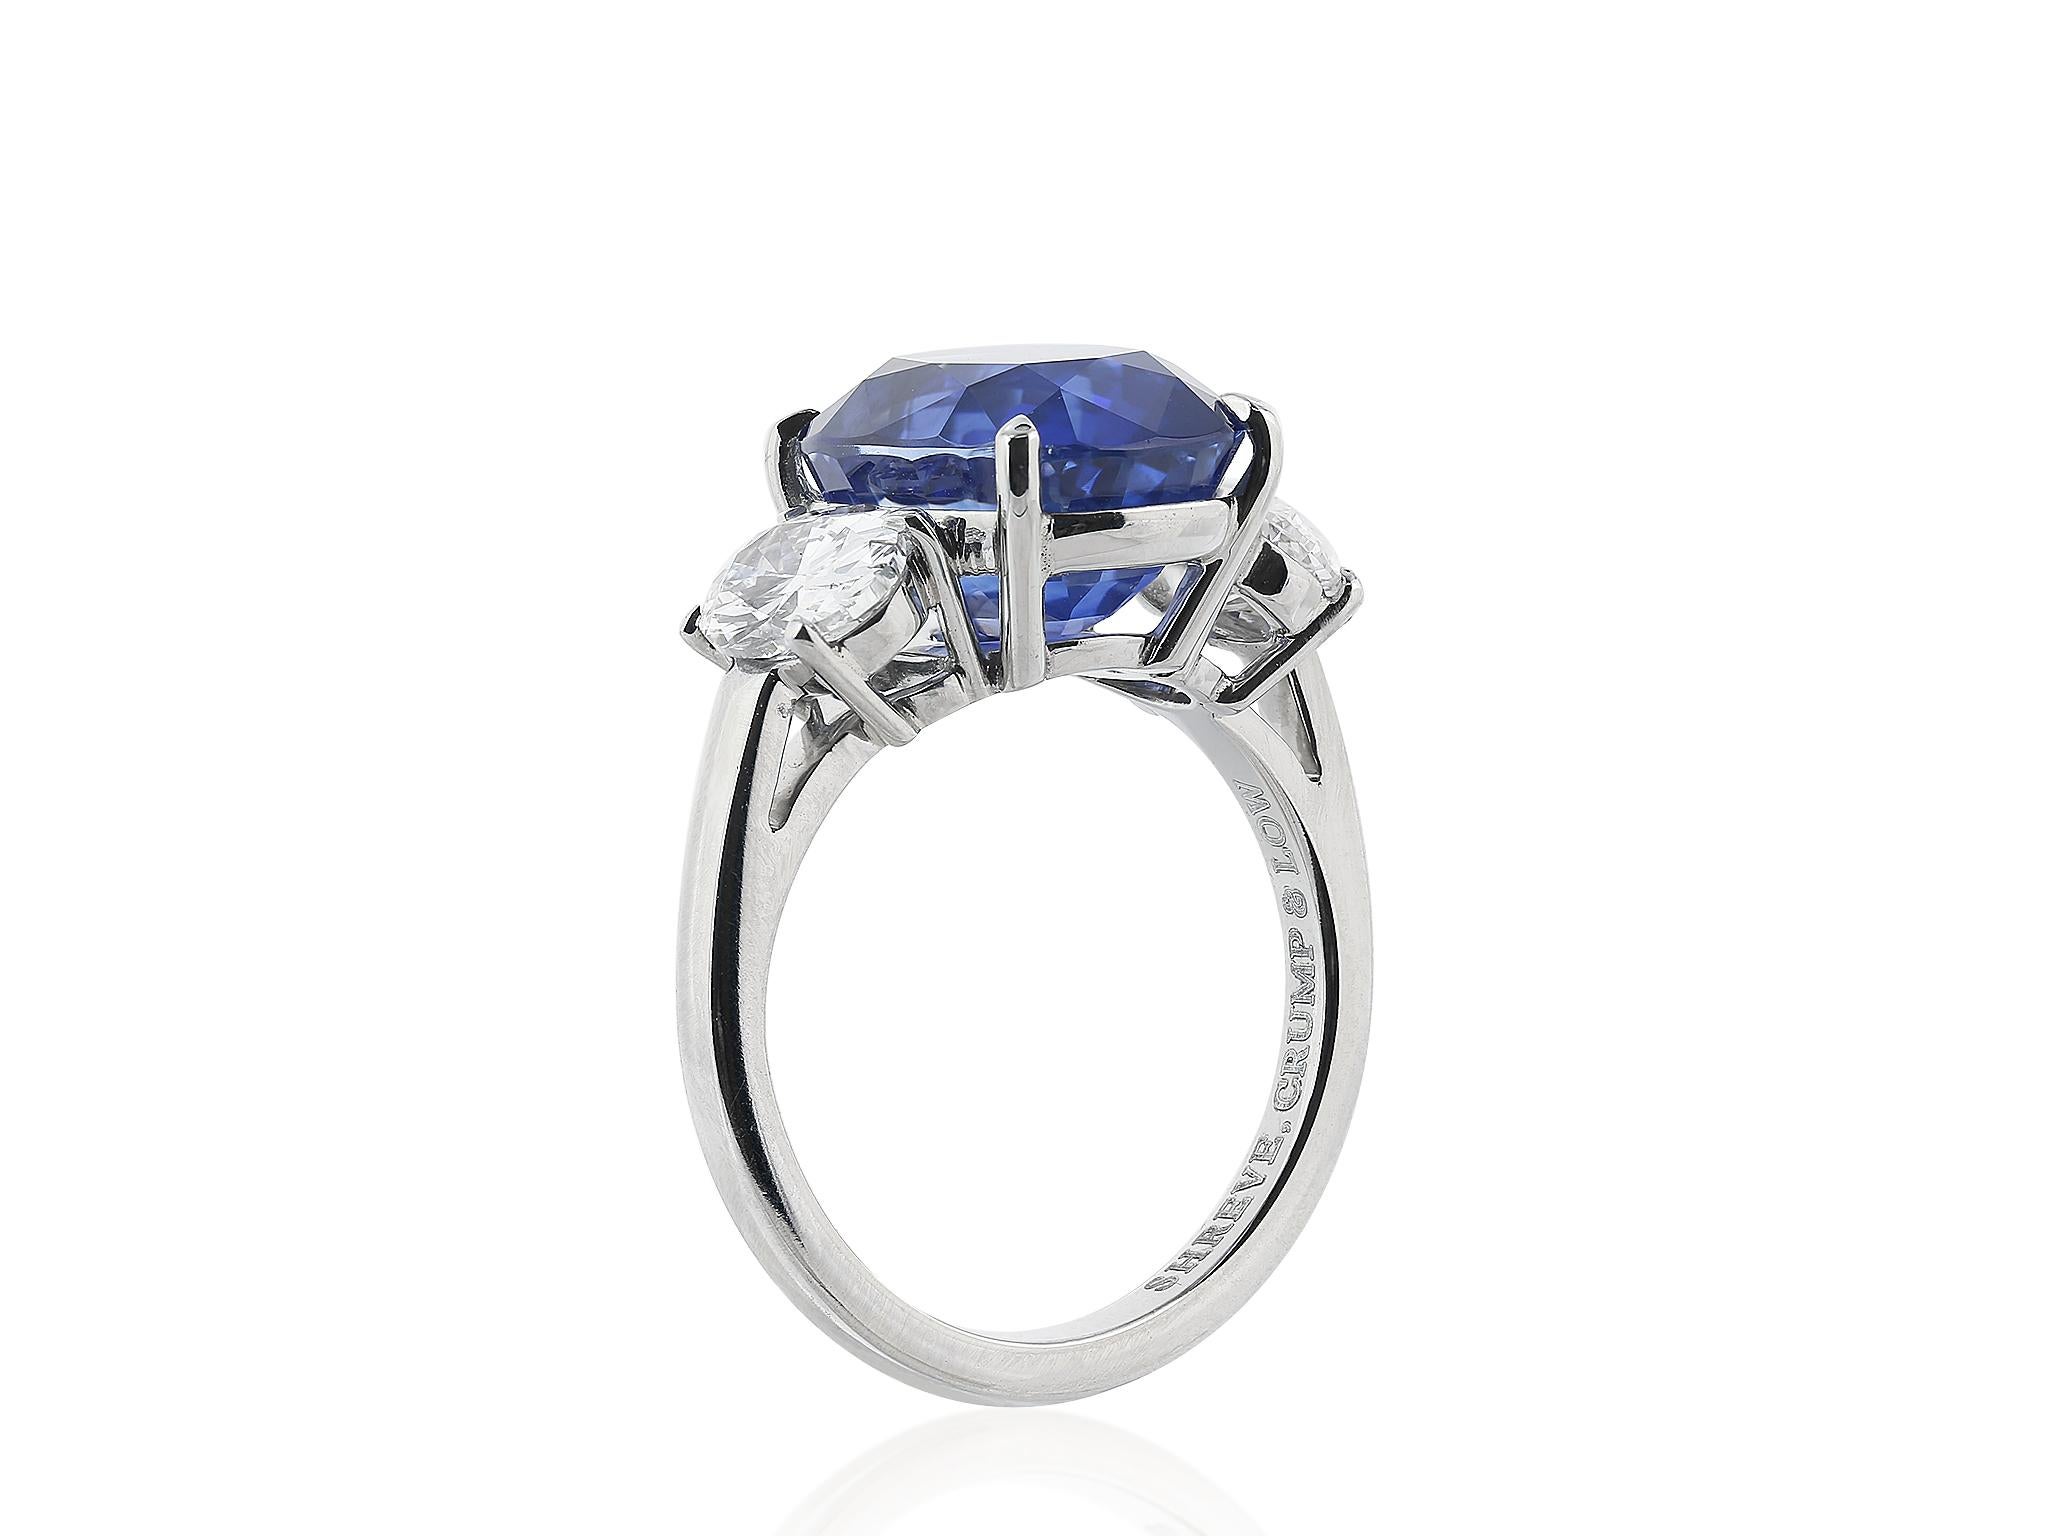 Platinum custom made 3 stone ring consisting of one oval shaped sapphire weighing 7.99 carats, the center stones is flanked by 2 oval brilliant diamonds having a total weight of 1.44 carats.